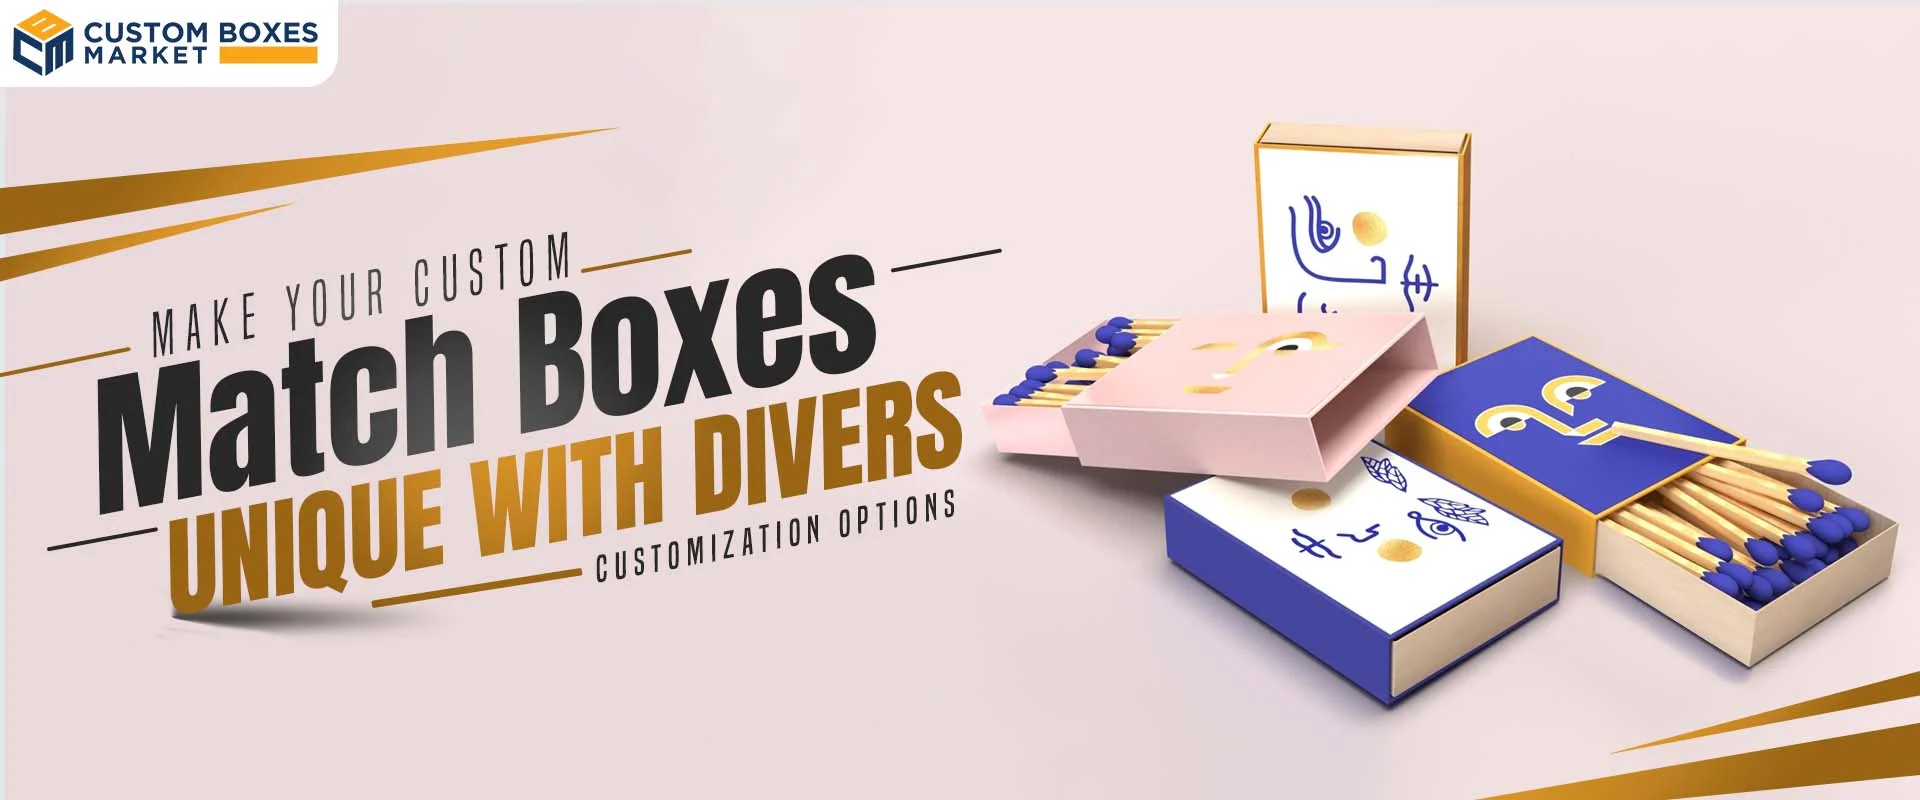 Make Your Custom Match Boxes Unique With Diverse Customization Options